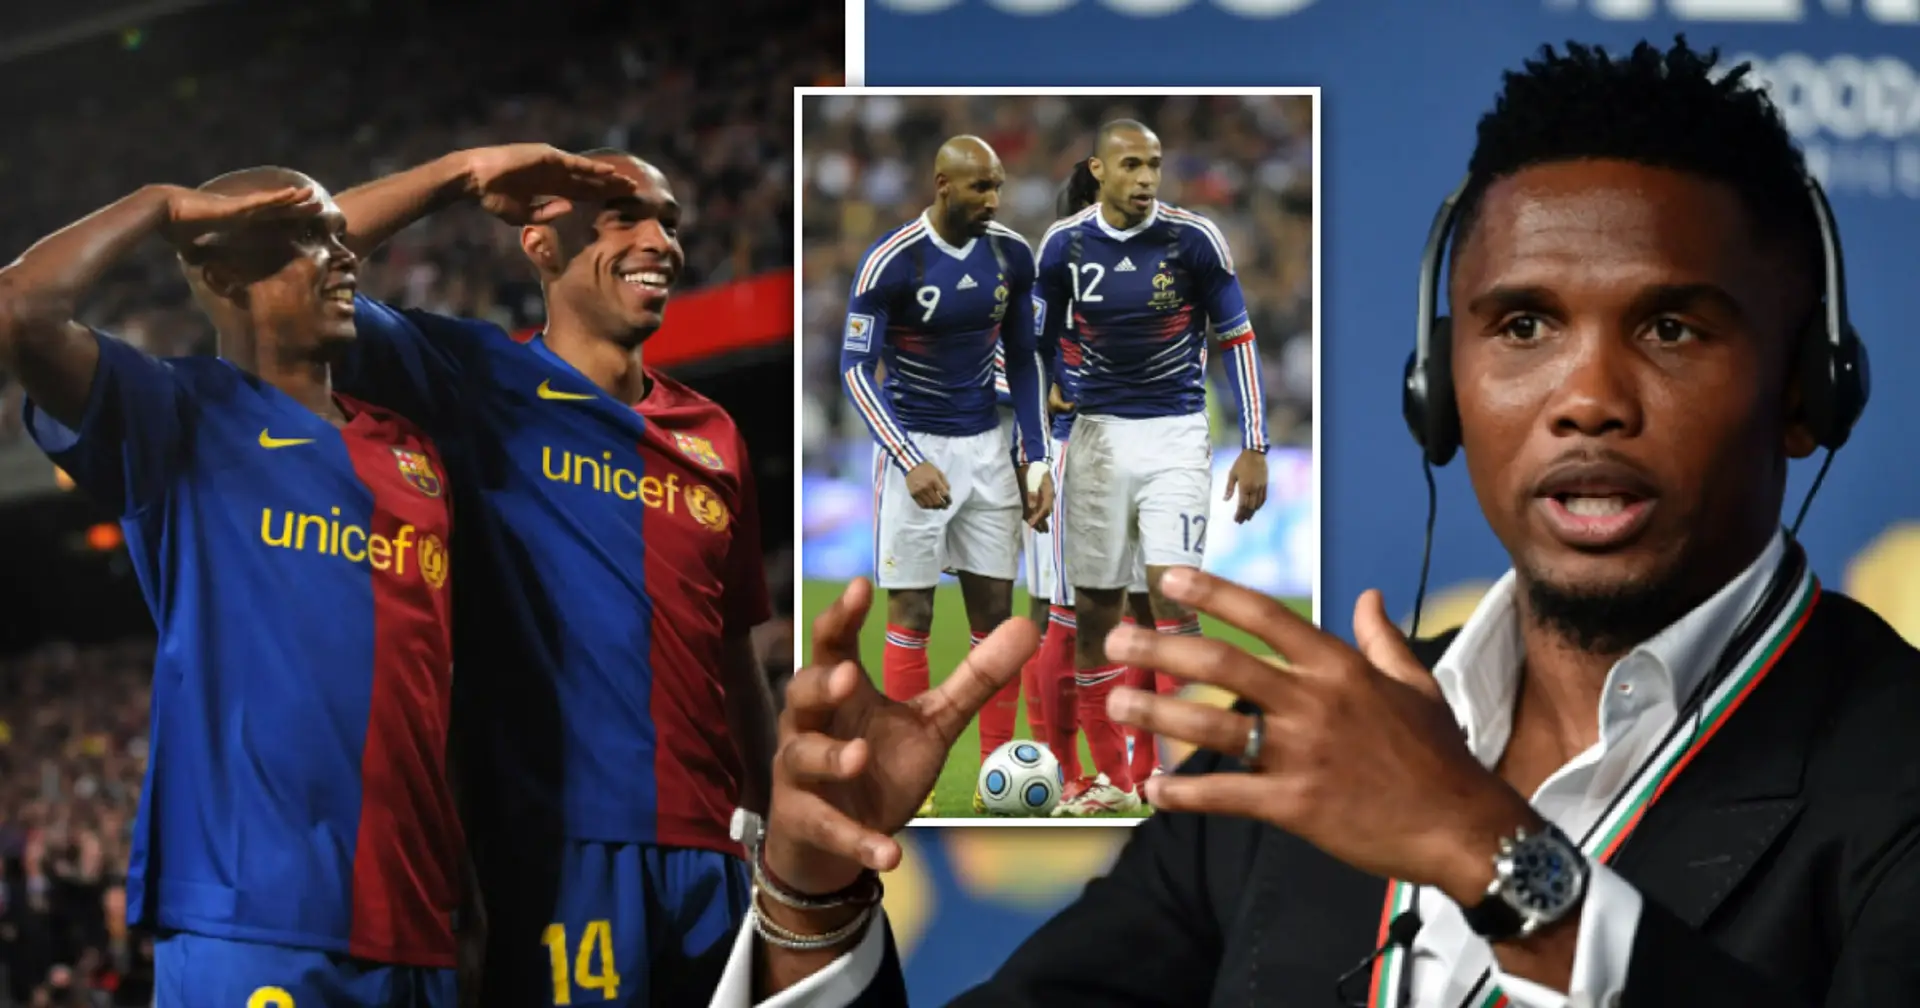 'Thierry Henry was not at the level of Anelka': Samuel Eto'o claims Thierry Henry is overrated in leaked video